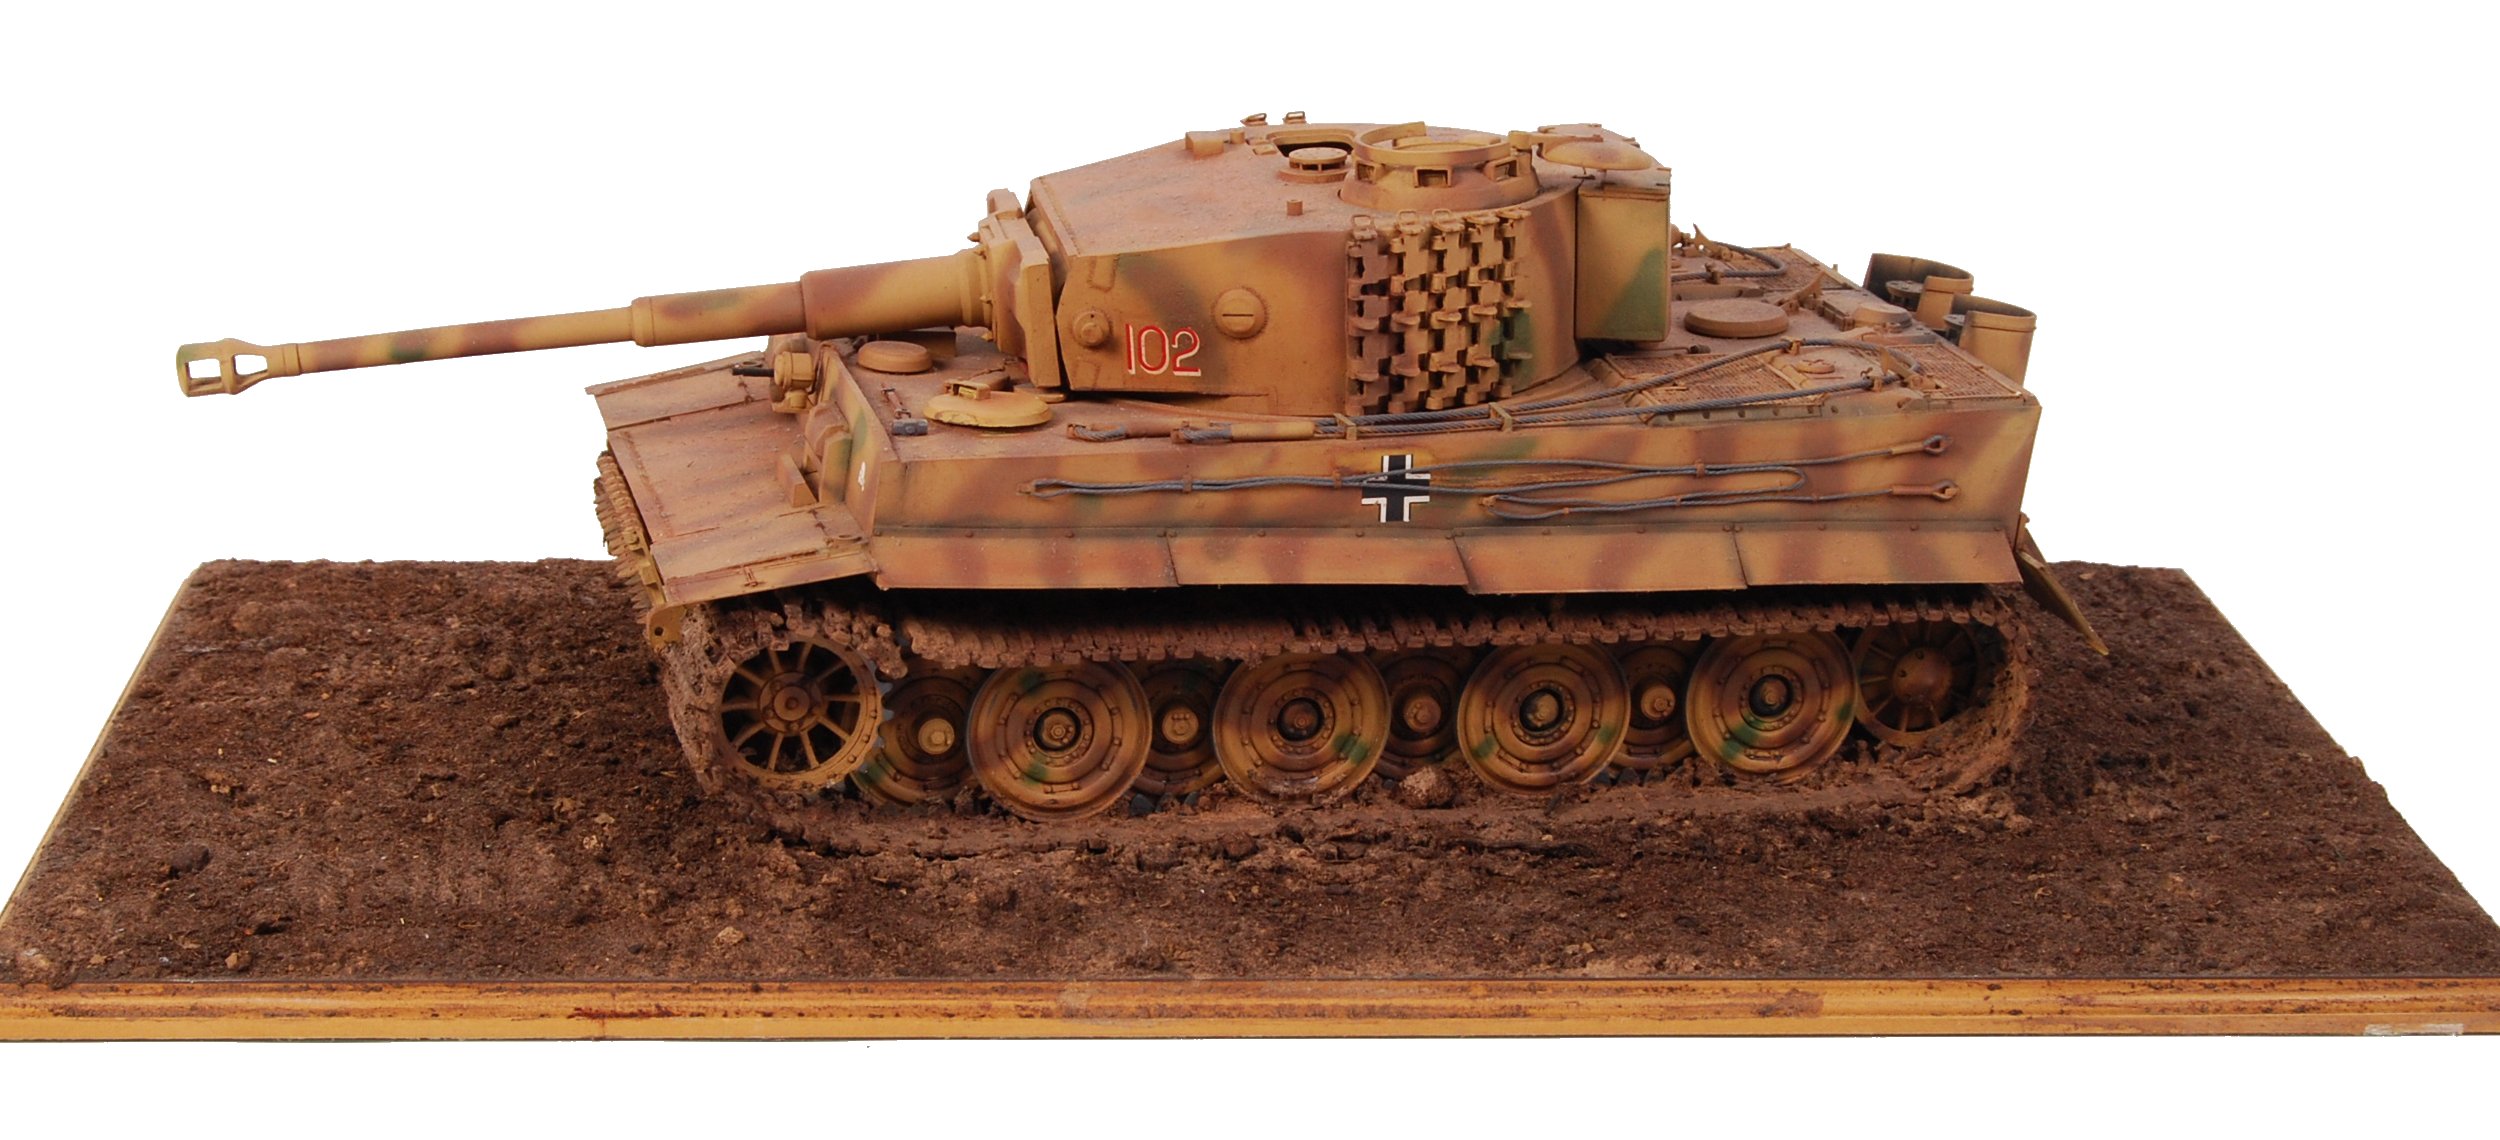 MUSEUM QUALITY TIGER TANK WWII MILITARY MODEL DIORAMA